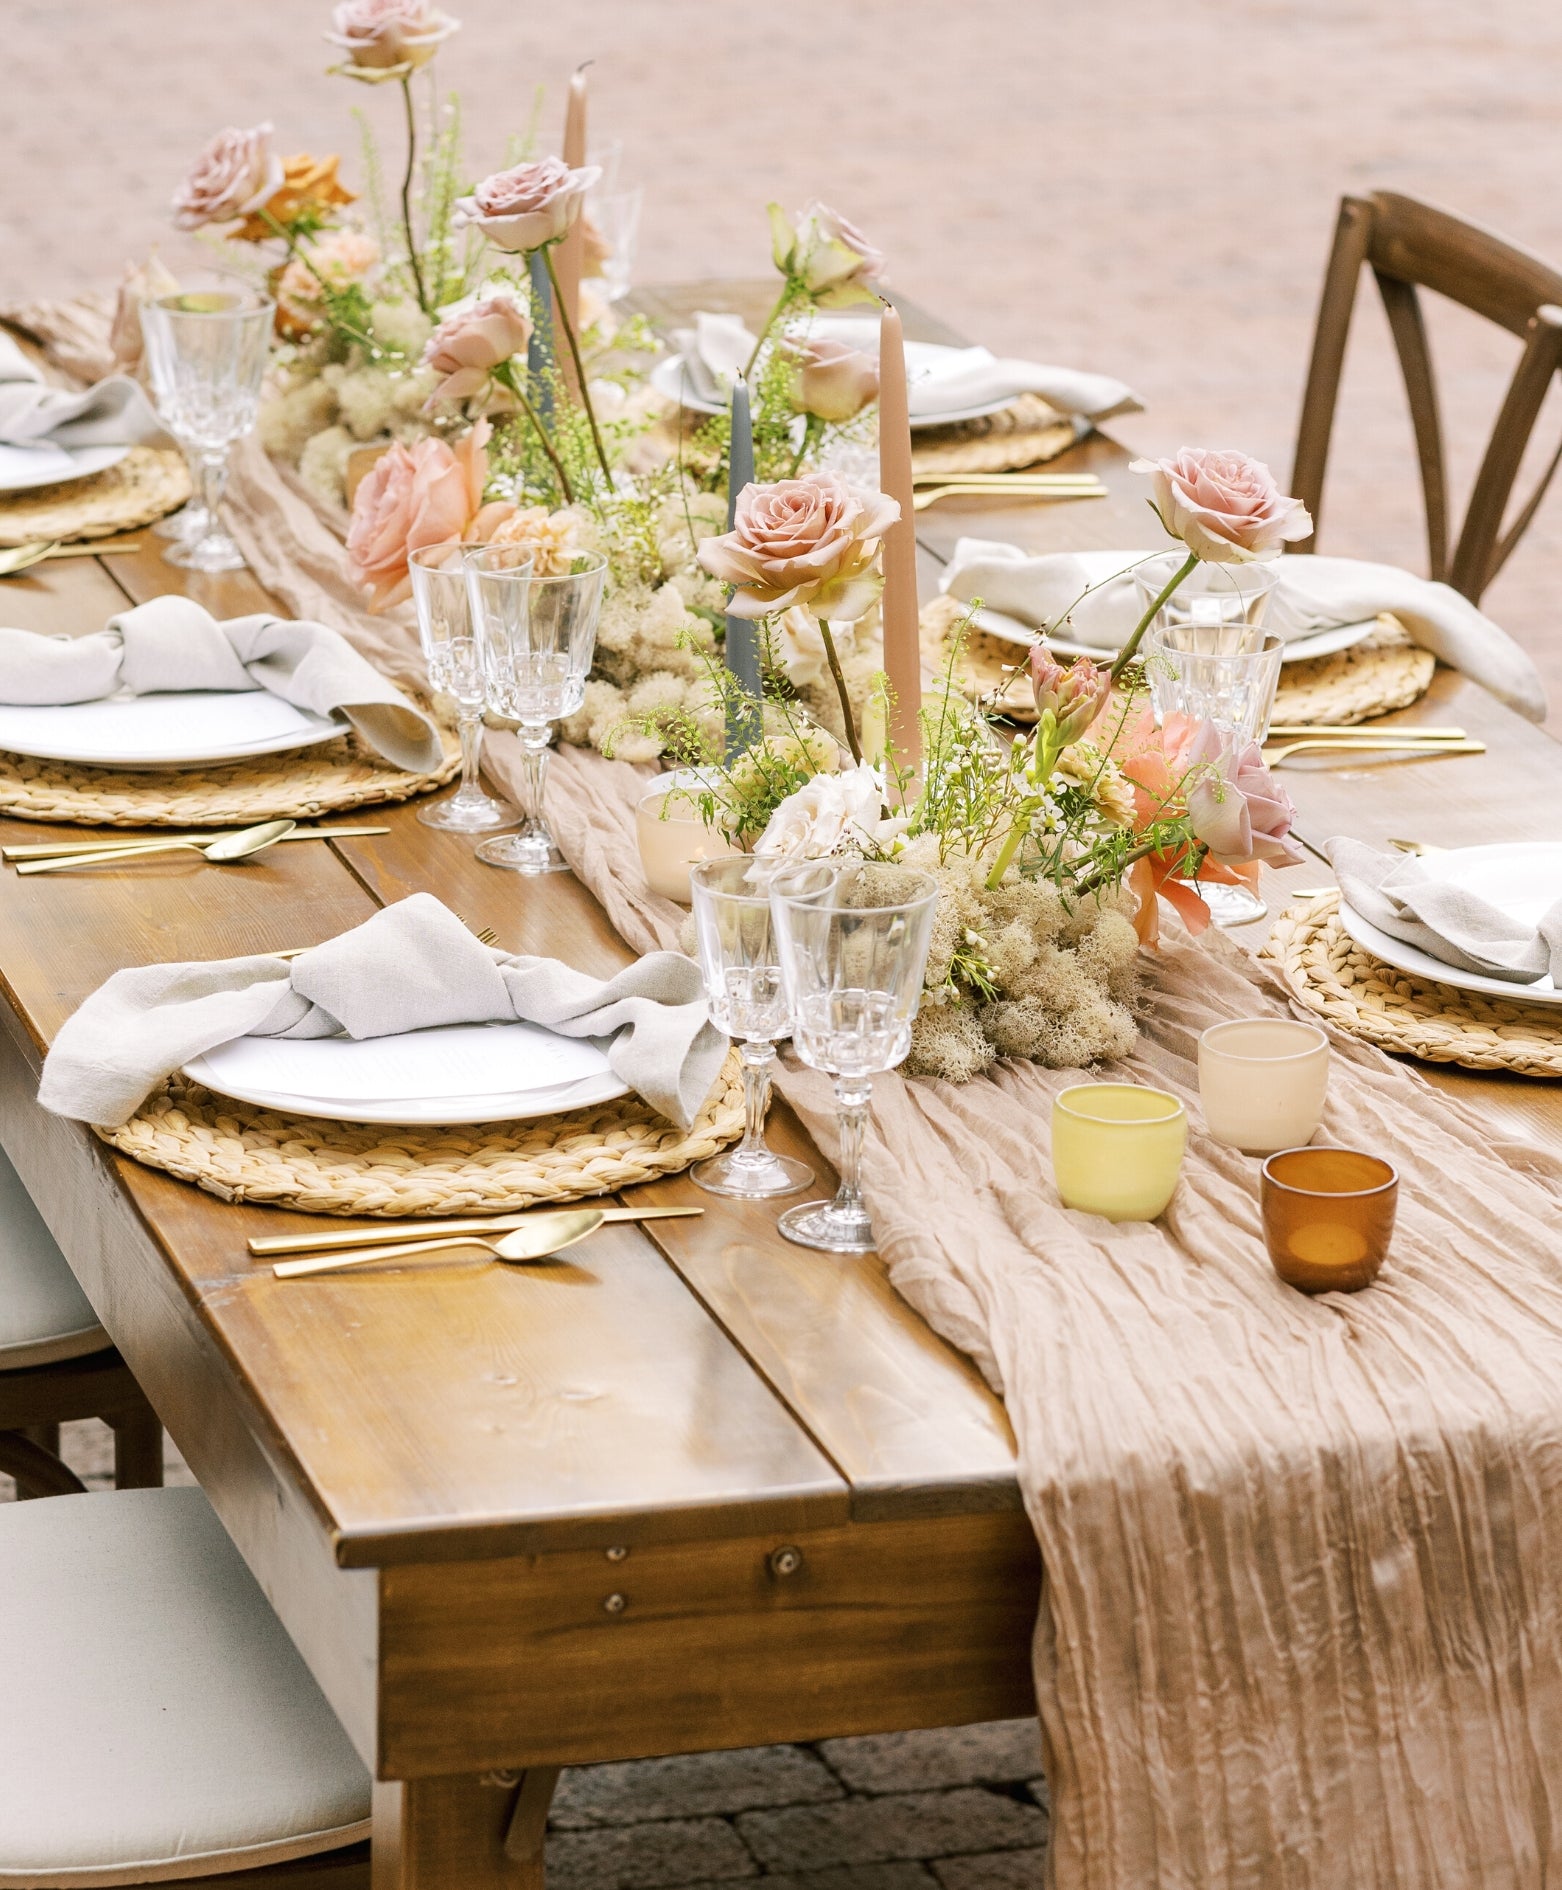 What a Host Home: Al Fresco Dining with cotton gauze table runner